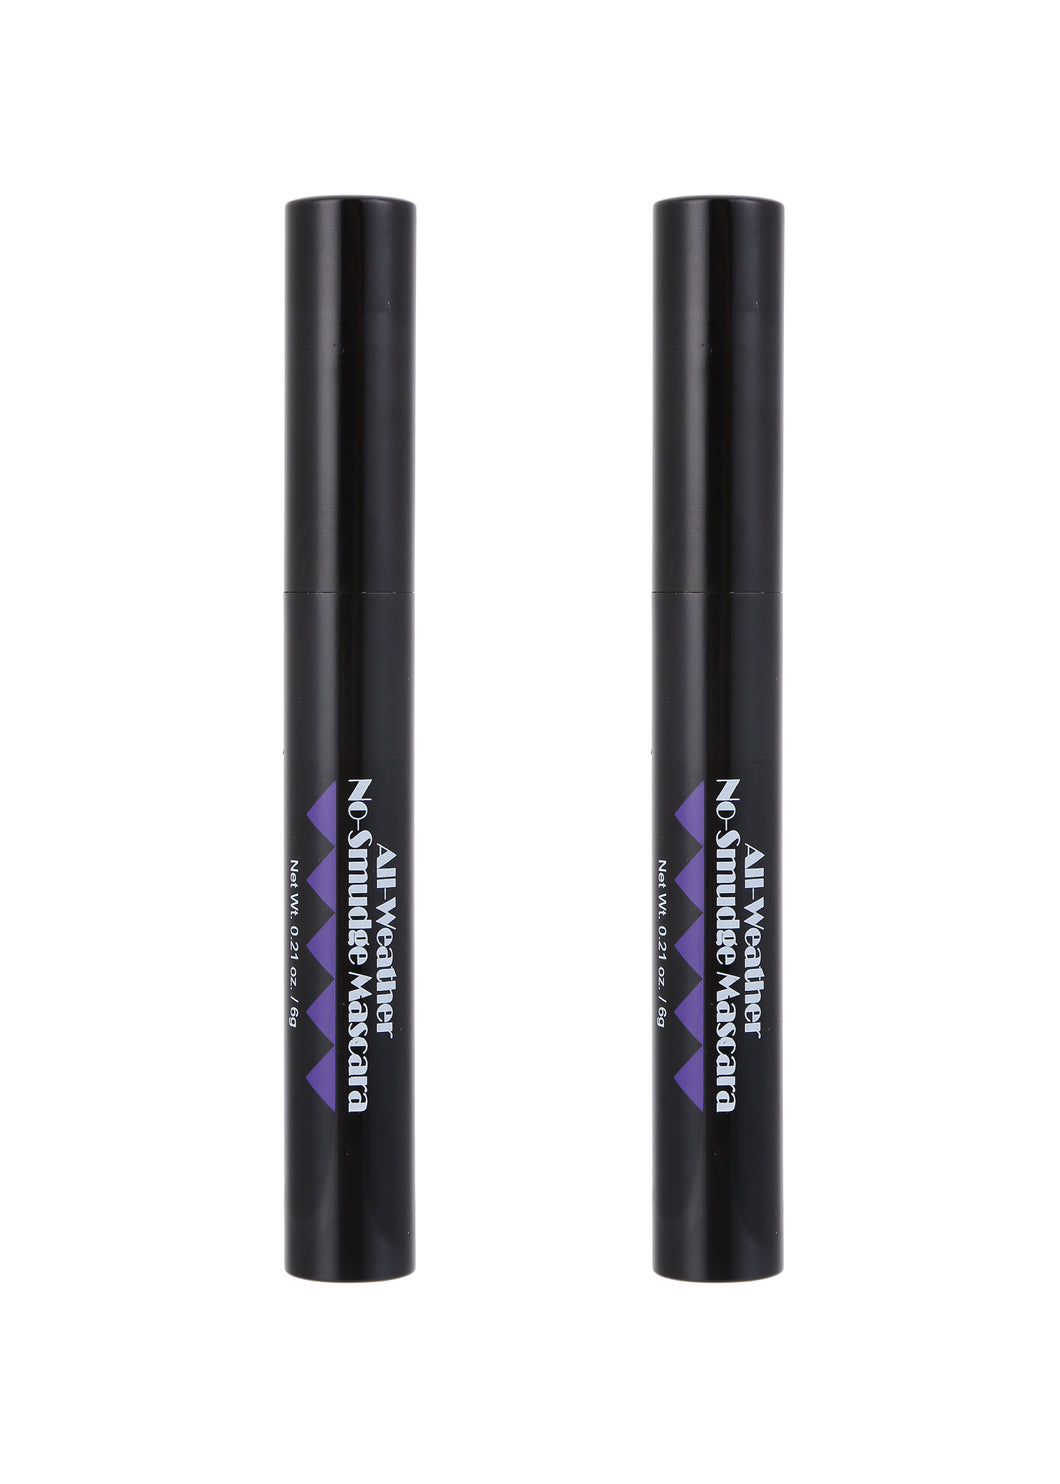 All-weather No-Smudge Mascara